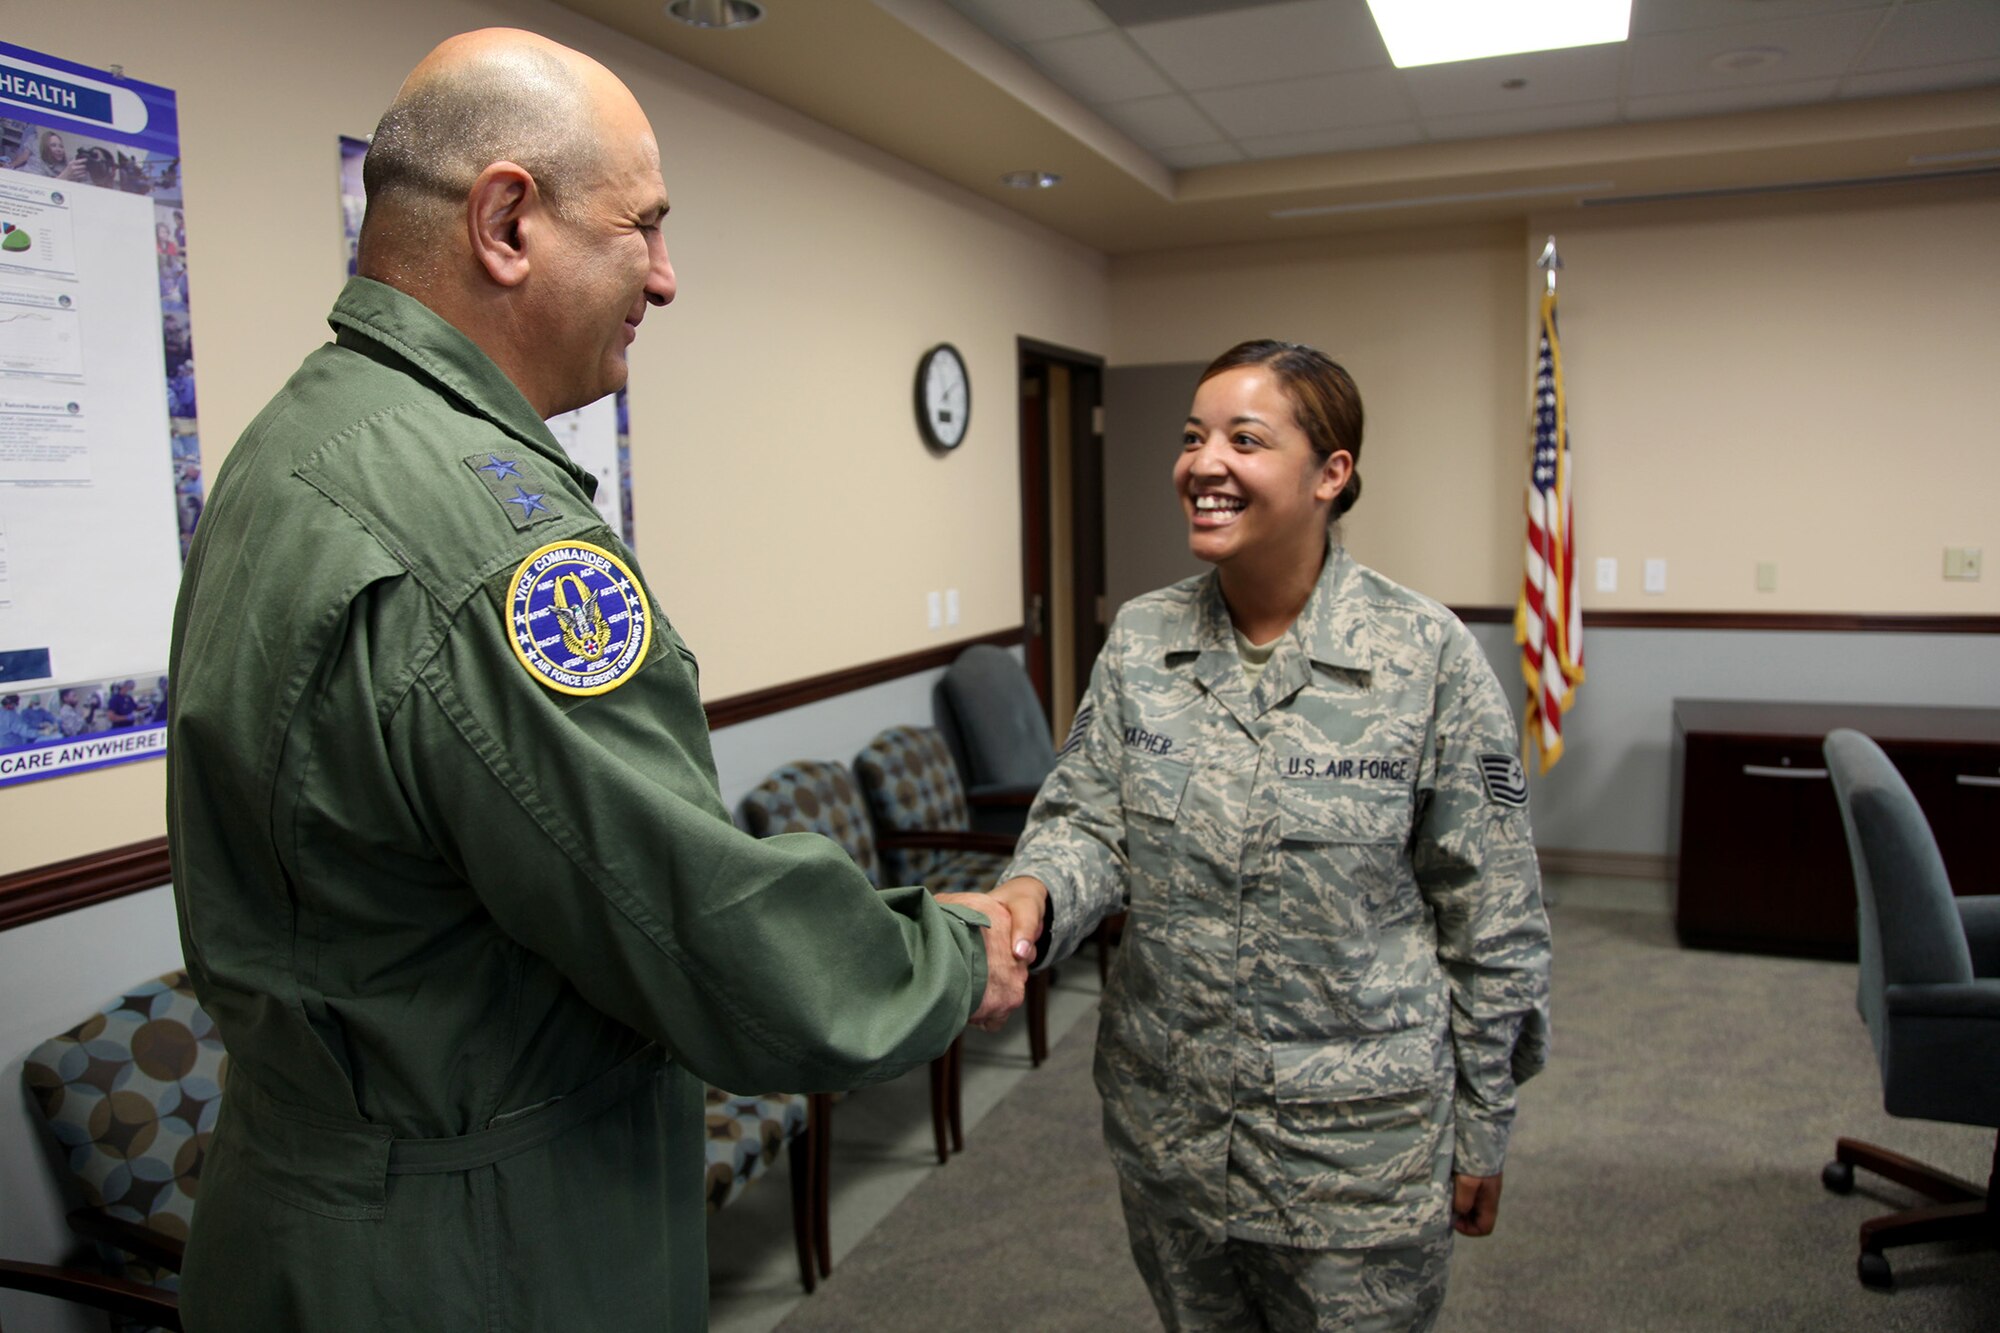 TRAVIS AIR FORCE BASE, Calif. --Maj. Gen. Richard S. "Beef" Haddad, Vice Commander of the Air Force Reserve Command, presents a coin to Tech. Sgt. Nikole D. Napier, 349th Aerospace Medicine Squadron, in recognition for her work on the 349th Air Mobility Wing's innovative fitness clinic at David Grant USAF Medical Center, Travis Air Force Base, Calif., June 21, 2014. The clinic streamlines the process for determining medical profiles; ensuring fitness testing is not delayed by administrative requirements. The general visited facilities and met with Airman to see air mobility innovations helping Travis AFB personnel deliver America's hope and might around the globe. (U.S. Air Force photo/Lt. Col. Robert Couse-Baker)